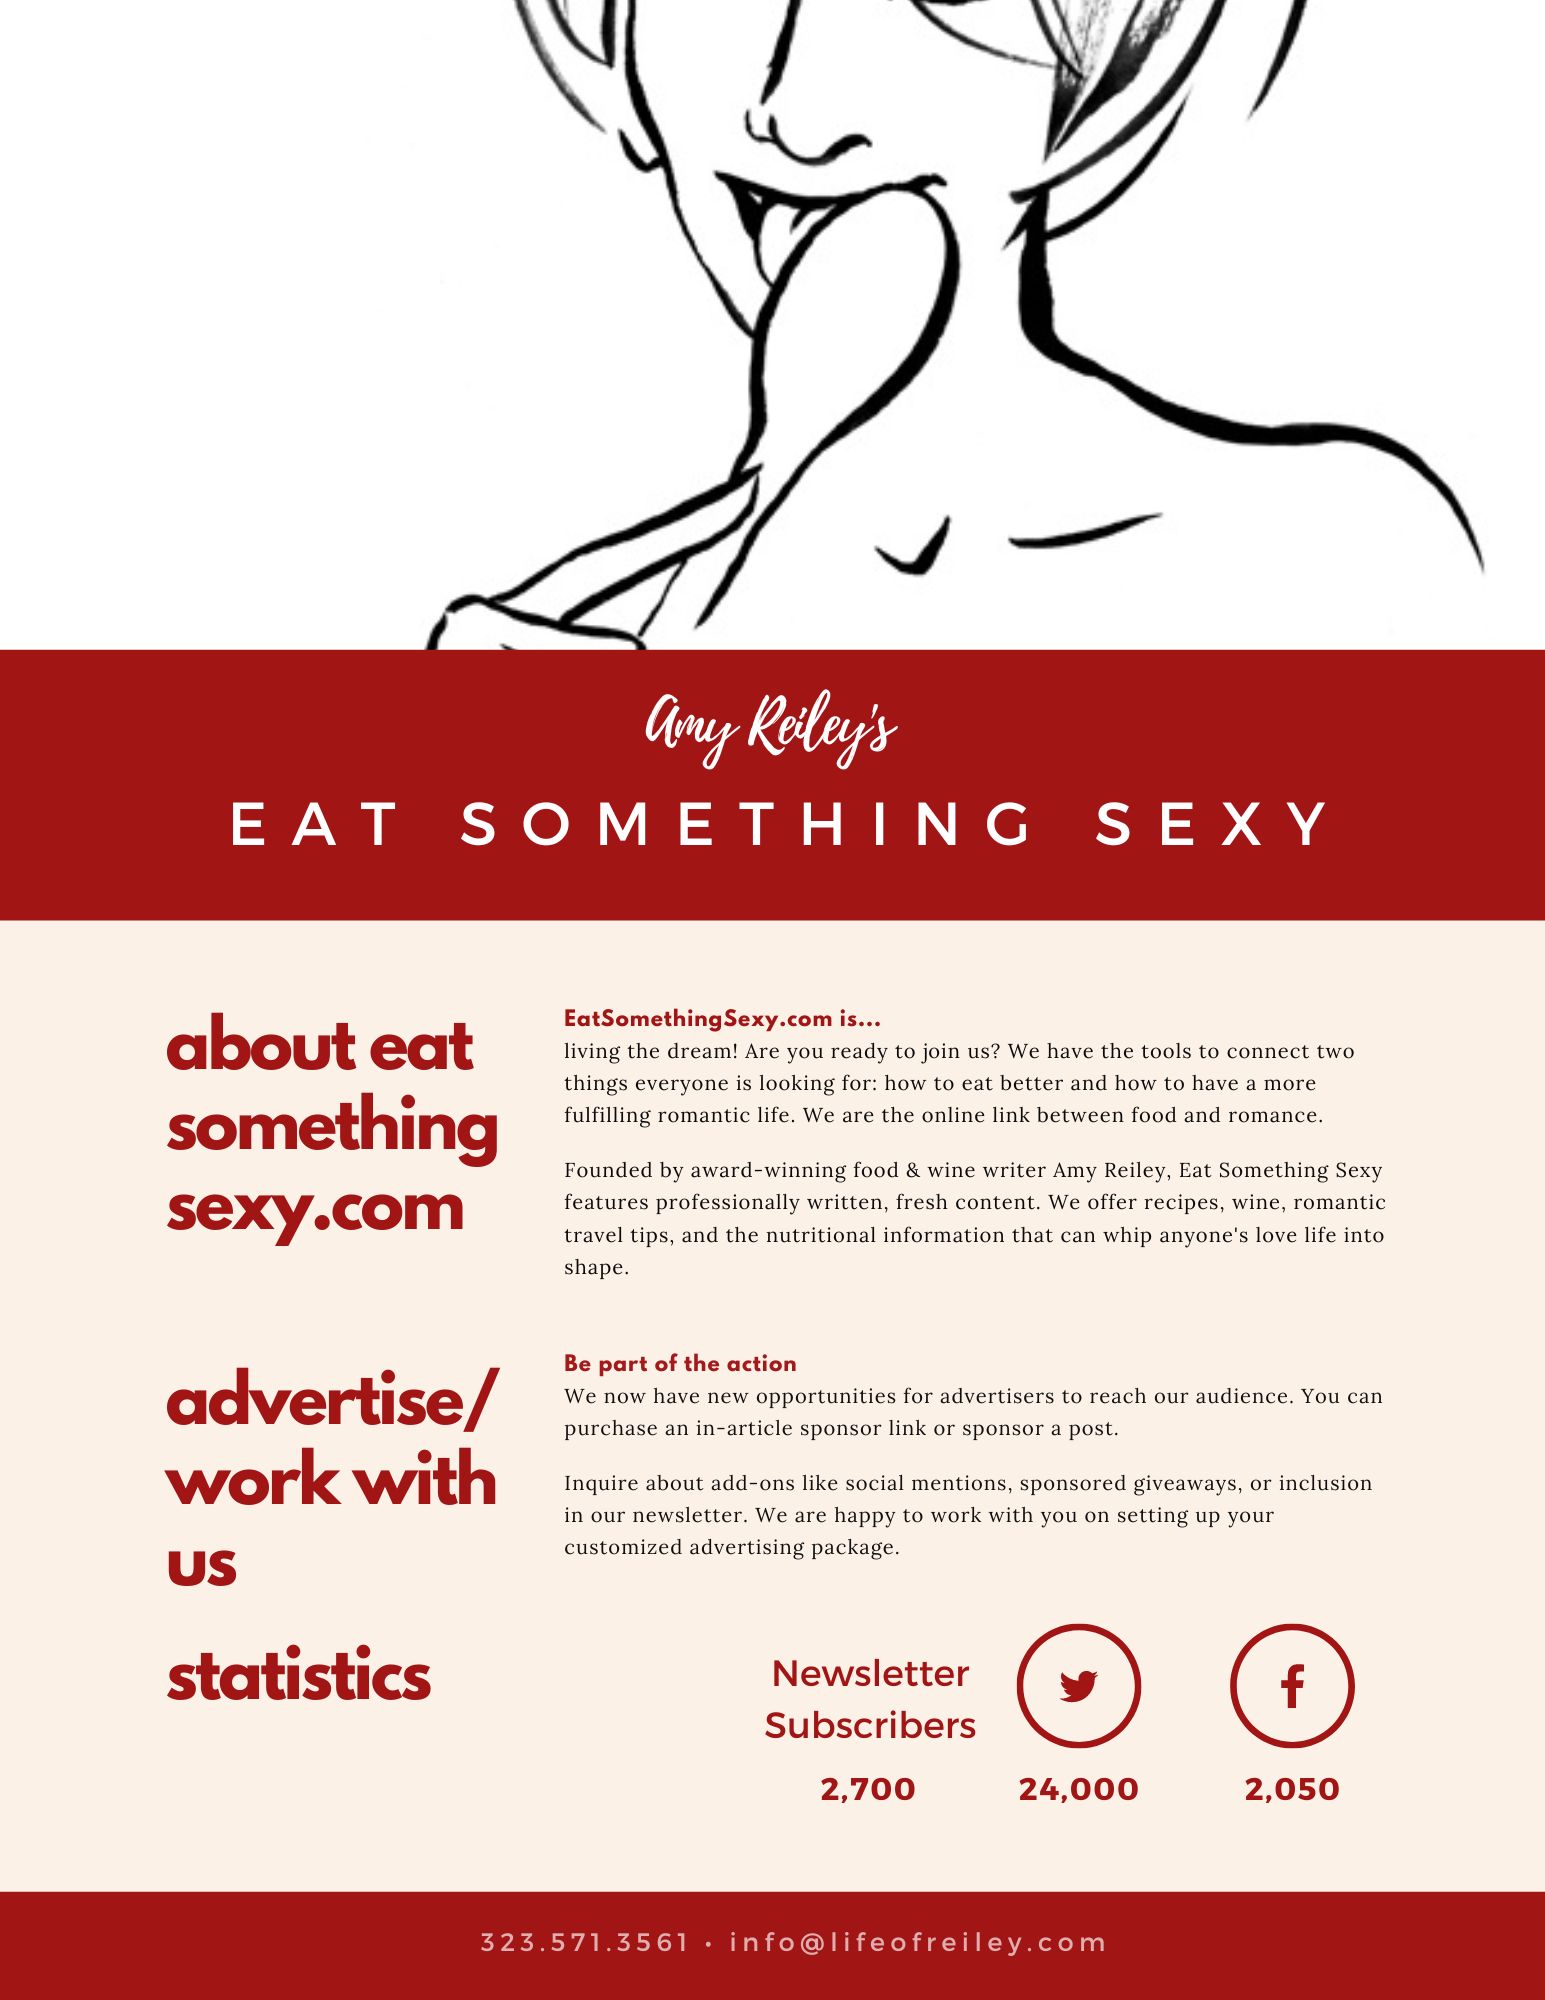 Eat Something Sexy Work With Us informational graphic